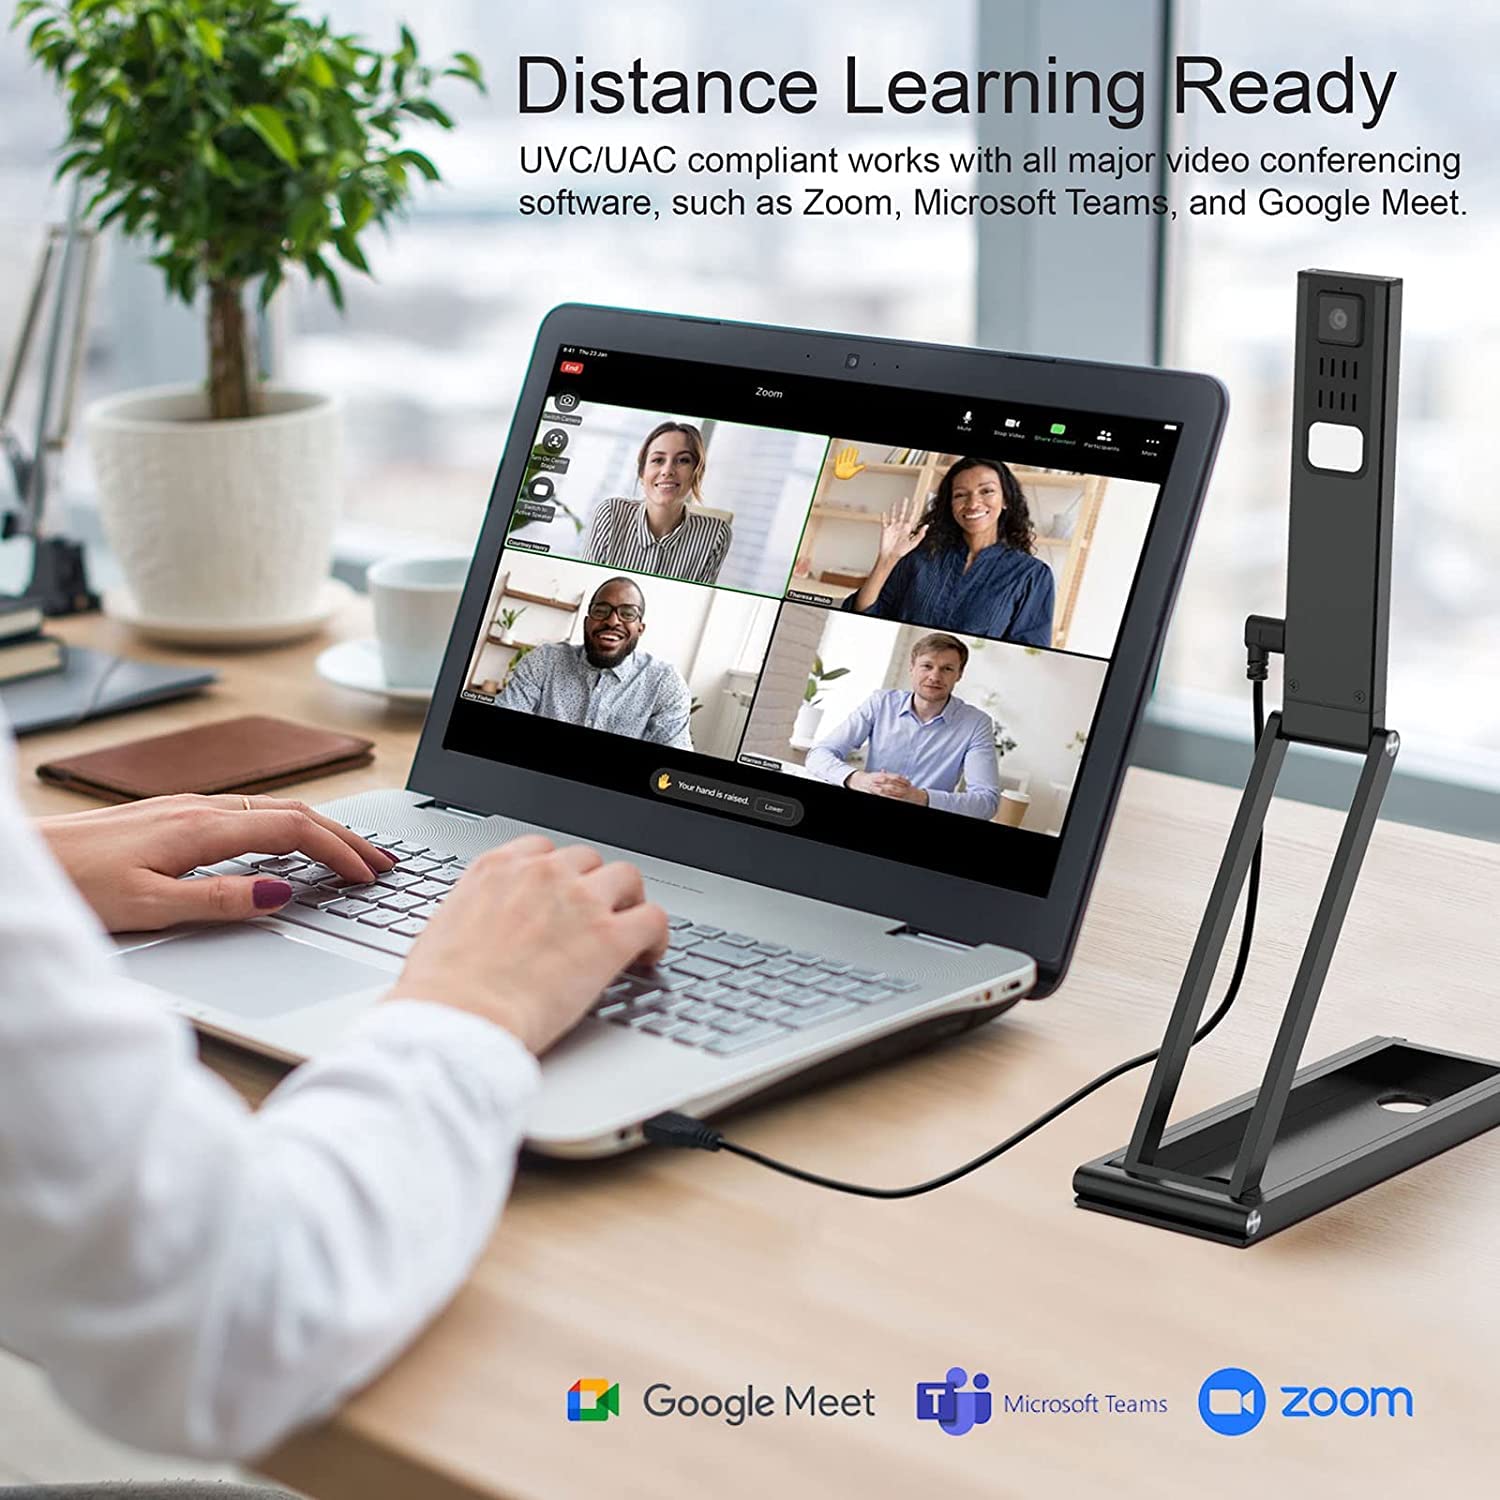 VIISAN P4U 13MP 4K UHD Document Camera & Webcam with Built-in Microphone, USB Visualiser A3-Size, LED Light, AutoFocus, Multi-Jointed Design, Fold, for Distance Teaching & Live Demo-Windows, macOS